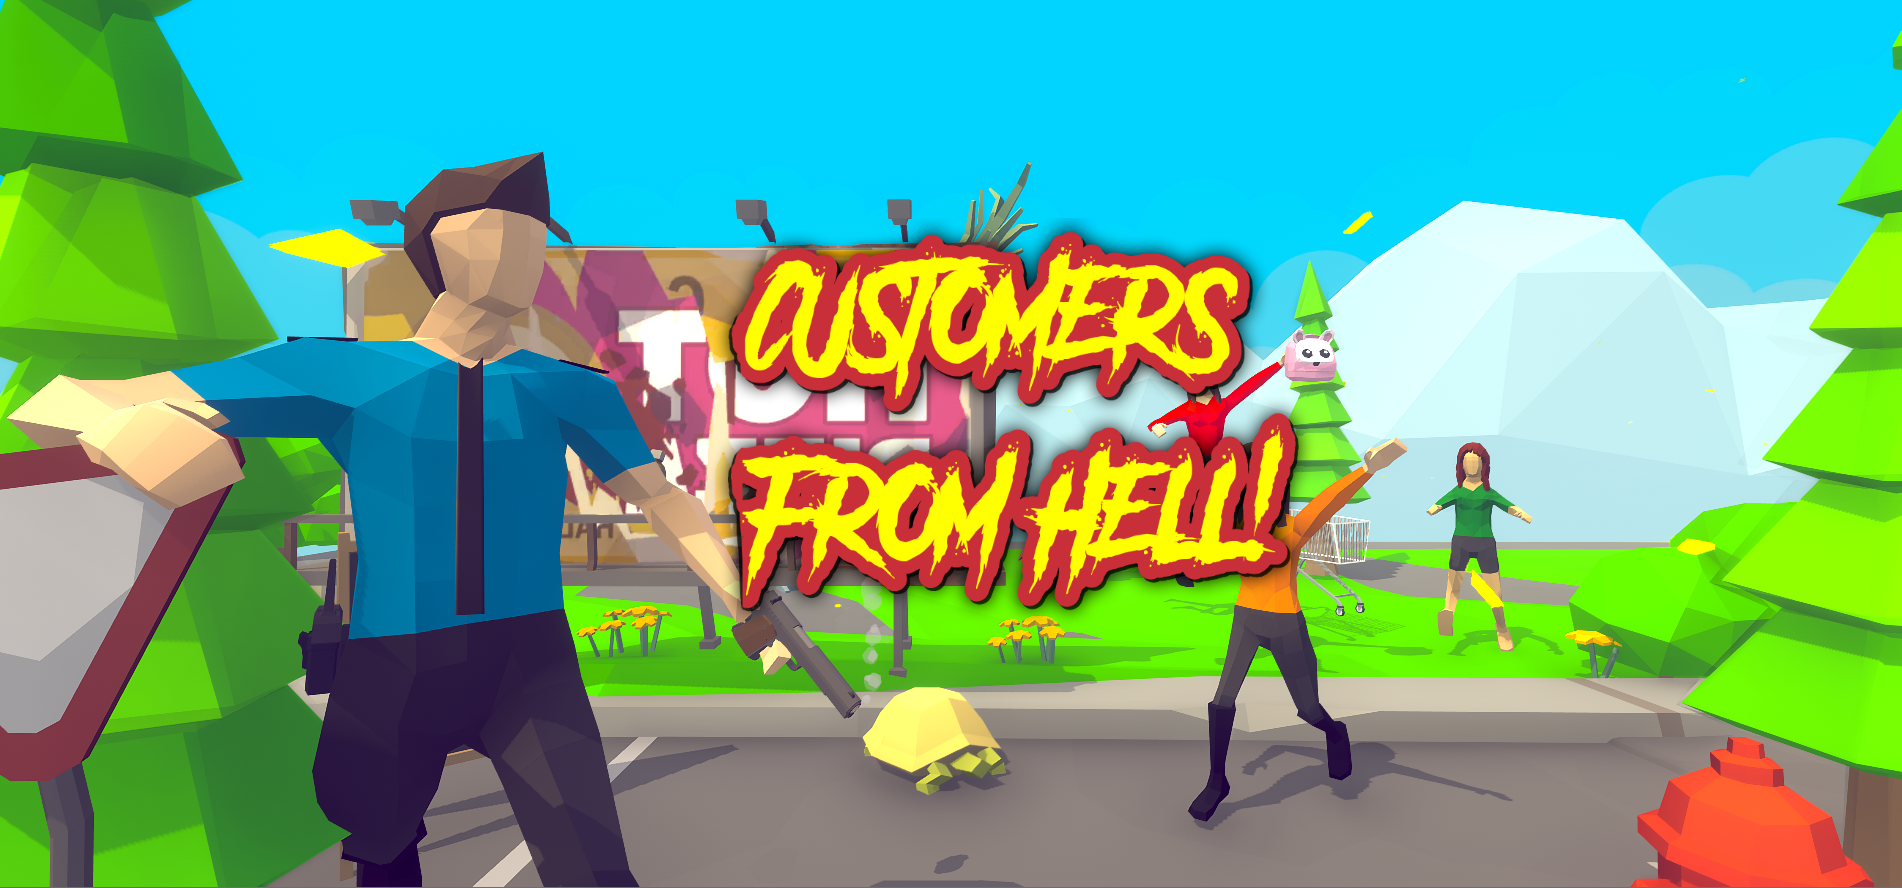 Customers From Hell - Game For Retail Workers (Survival 'Zombie Karens' Game)